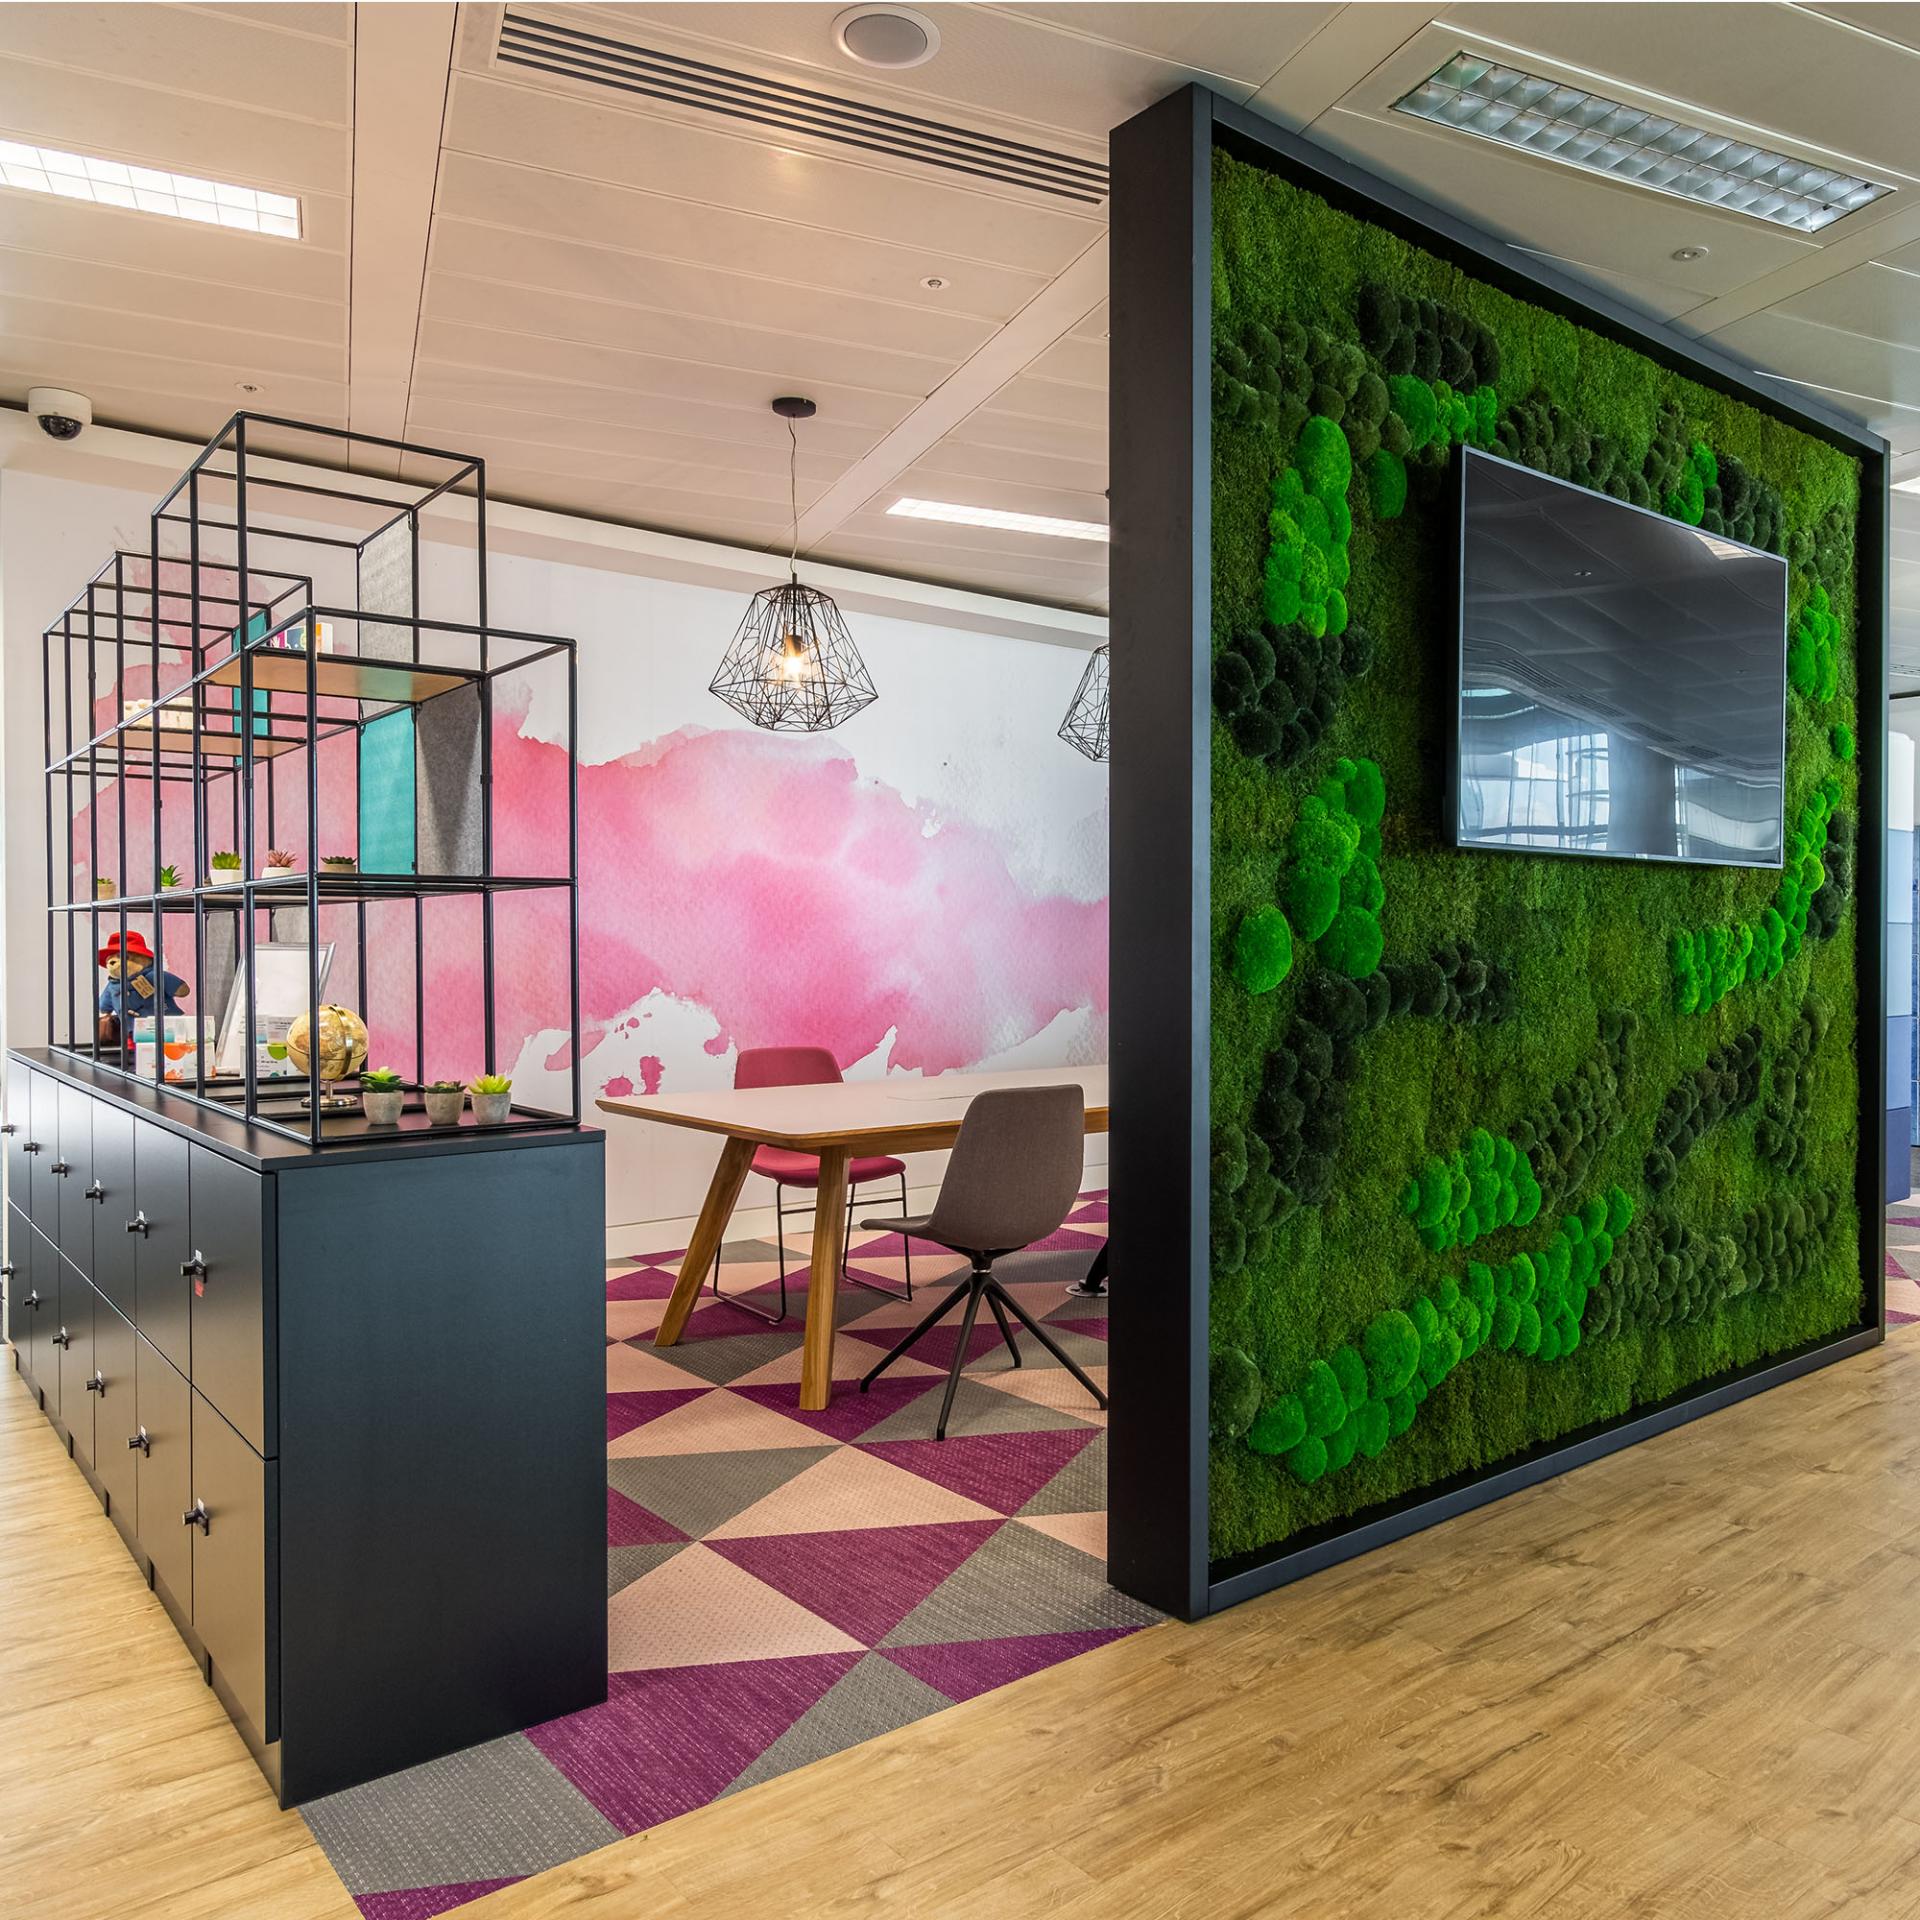 Conference room with a living wall at the Vertex Pharmaceuticals international headquarters in London